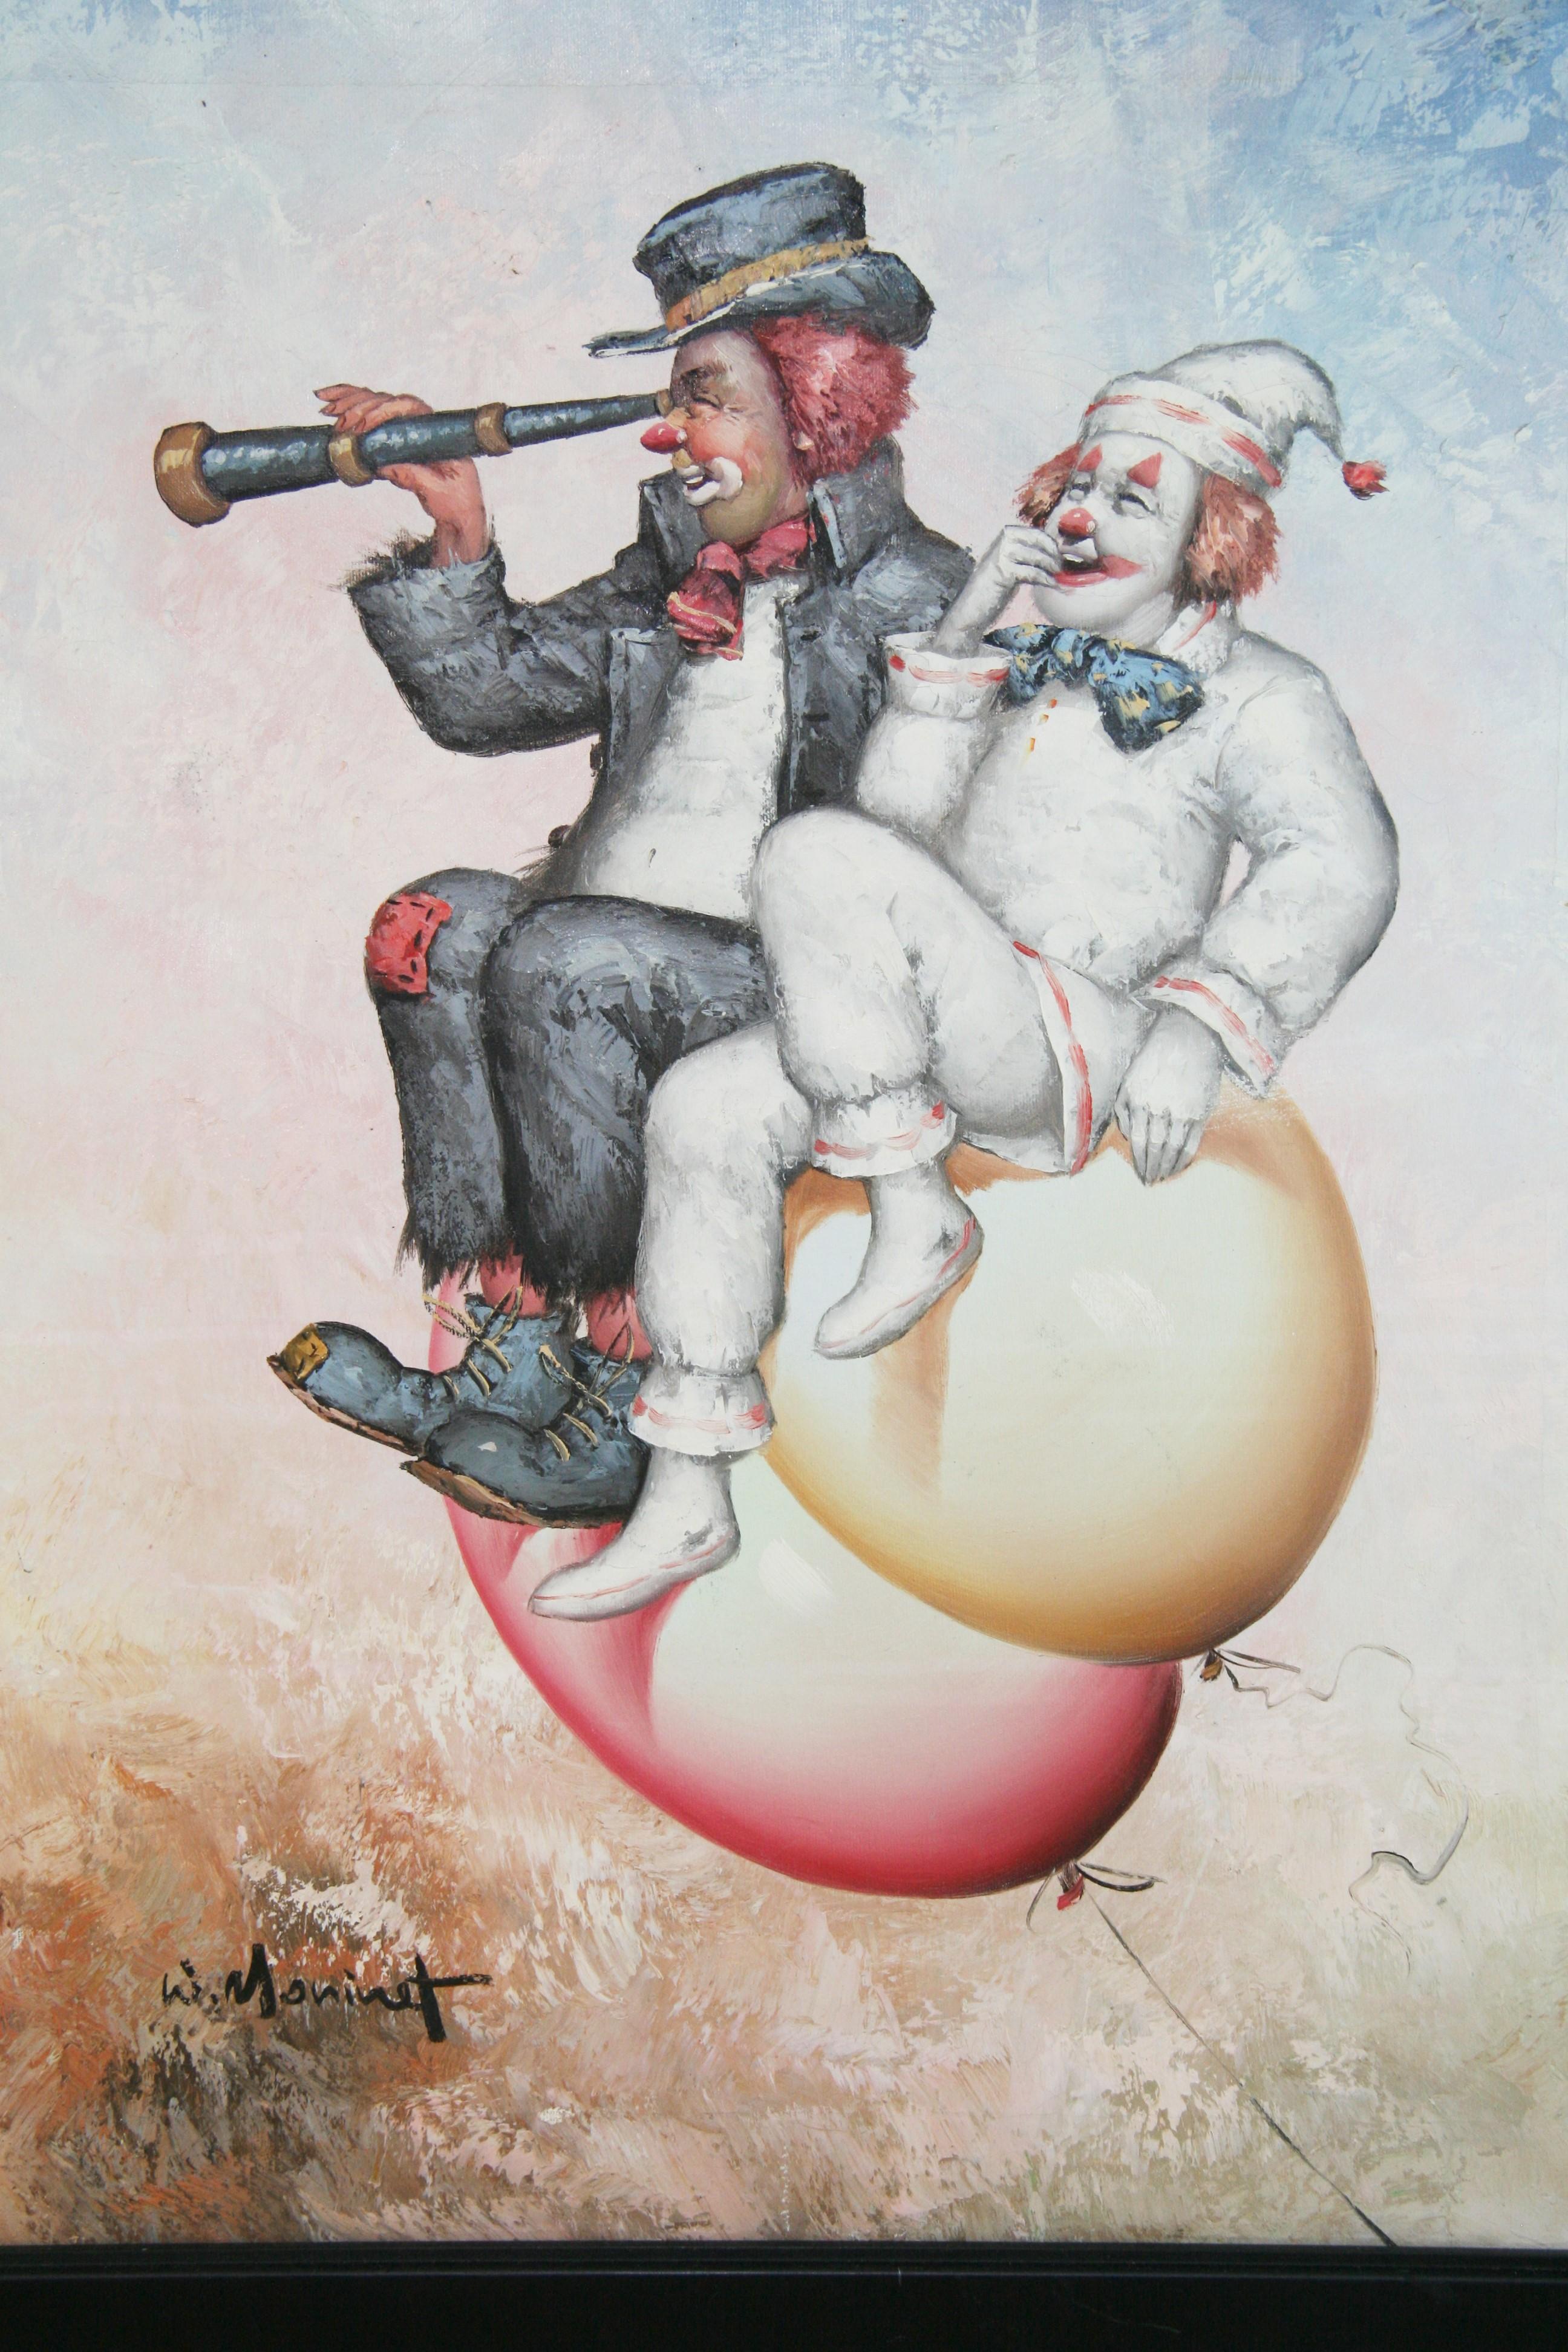 Unknown Abstract Painting - Modern Surreal Figurative Oil Painting Clowns on flying Balloons by W.Morinet